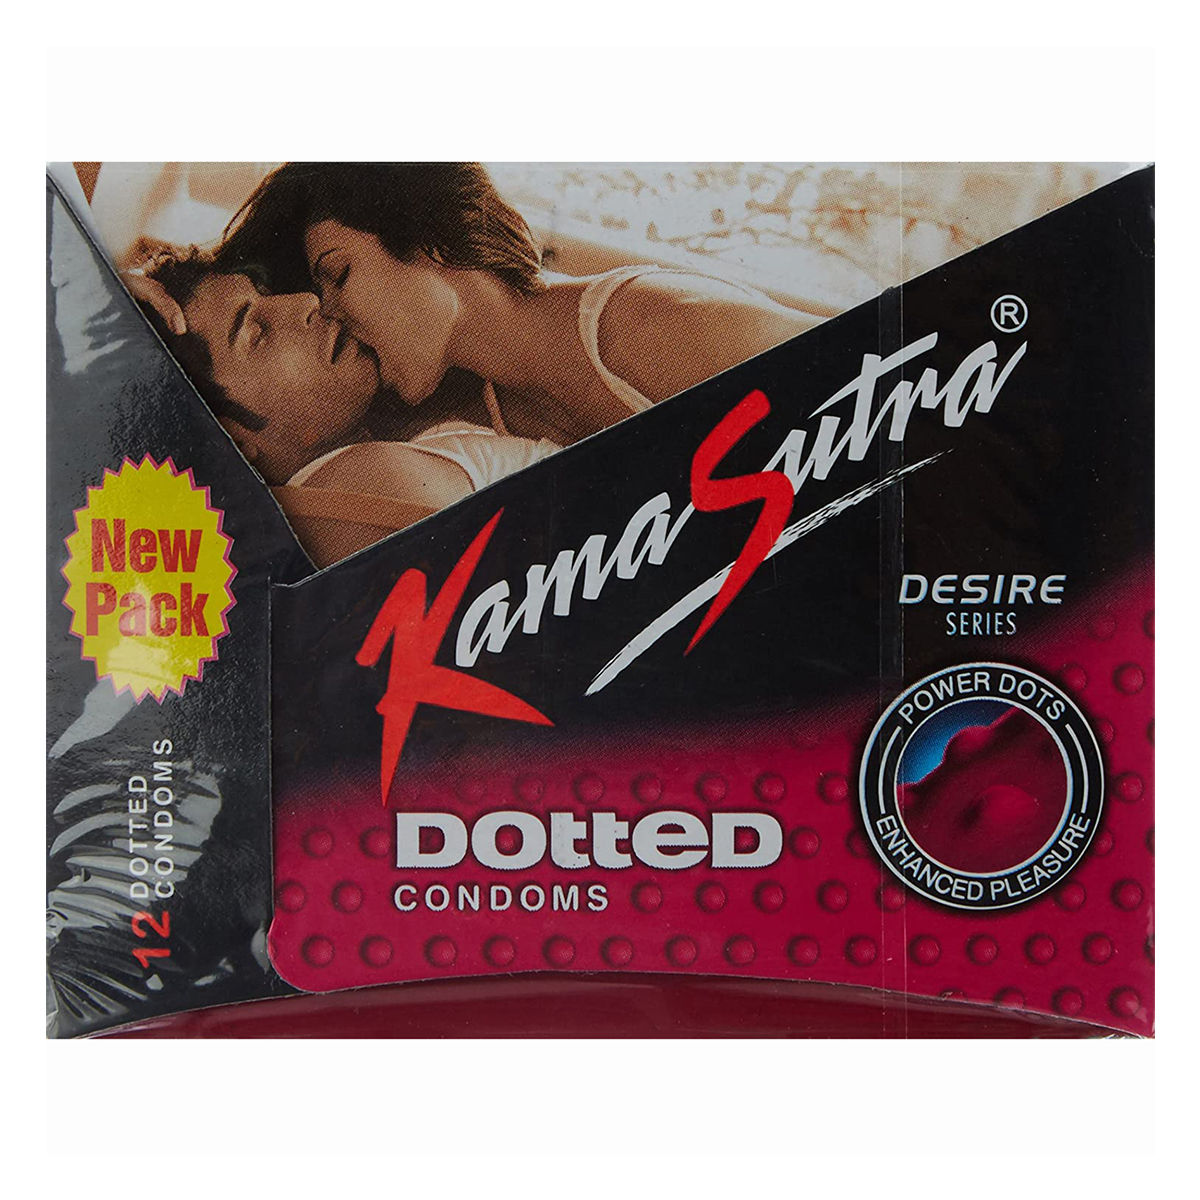 Buy Kamasutra Dotted Condoms, 12 Count Online